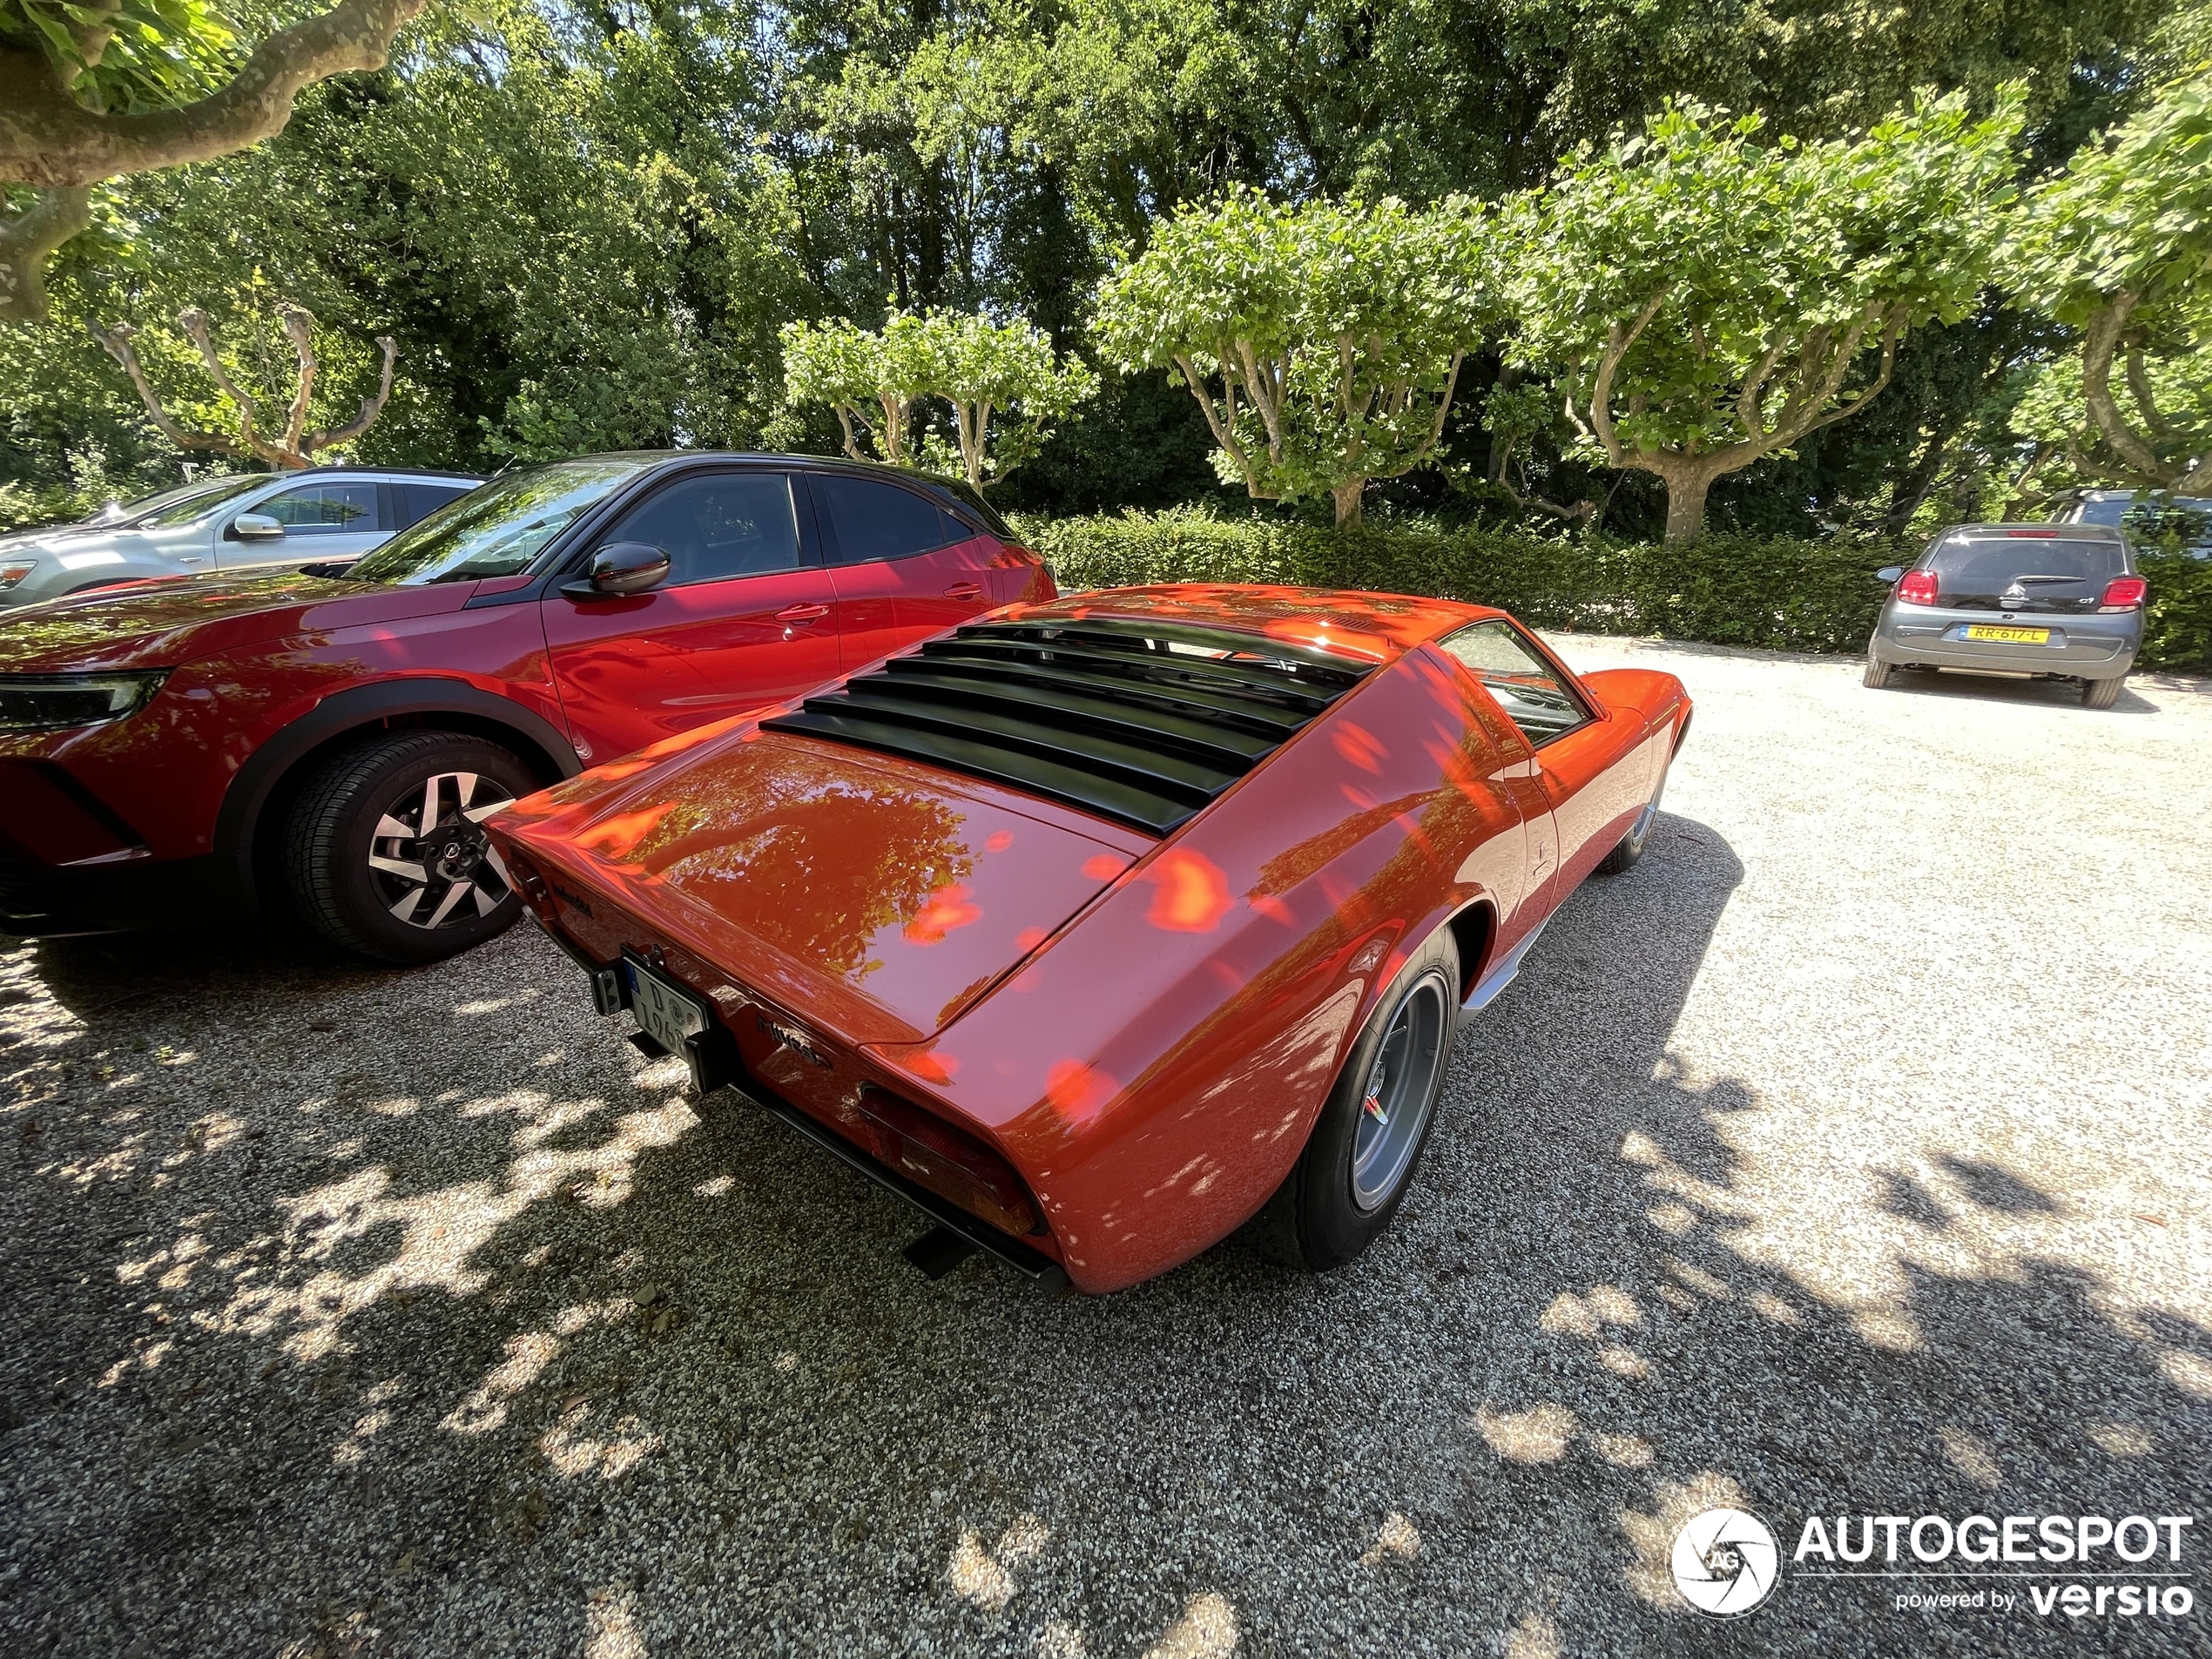 This Miura appears to come straight out of the movie "The Italian Job."